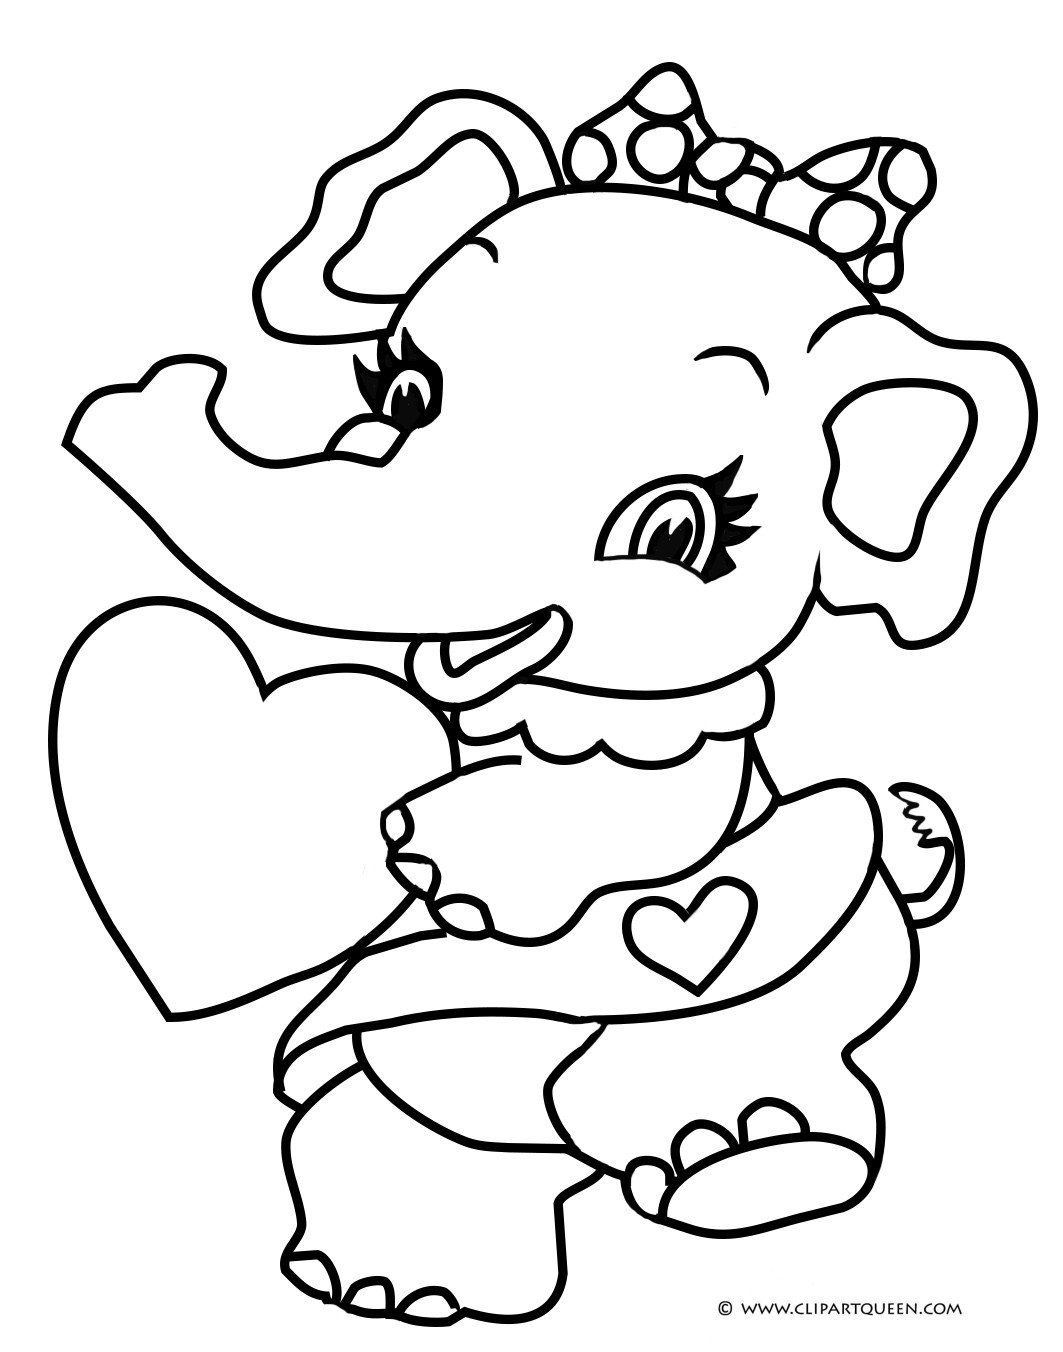 Valentine Day Coloring Pages Printable
 15 Valentine s Day coloring pages